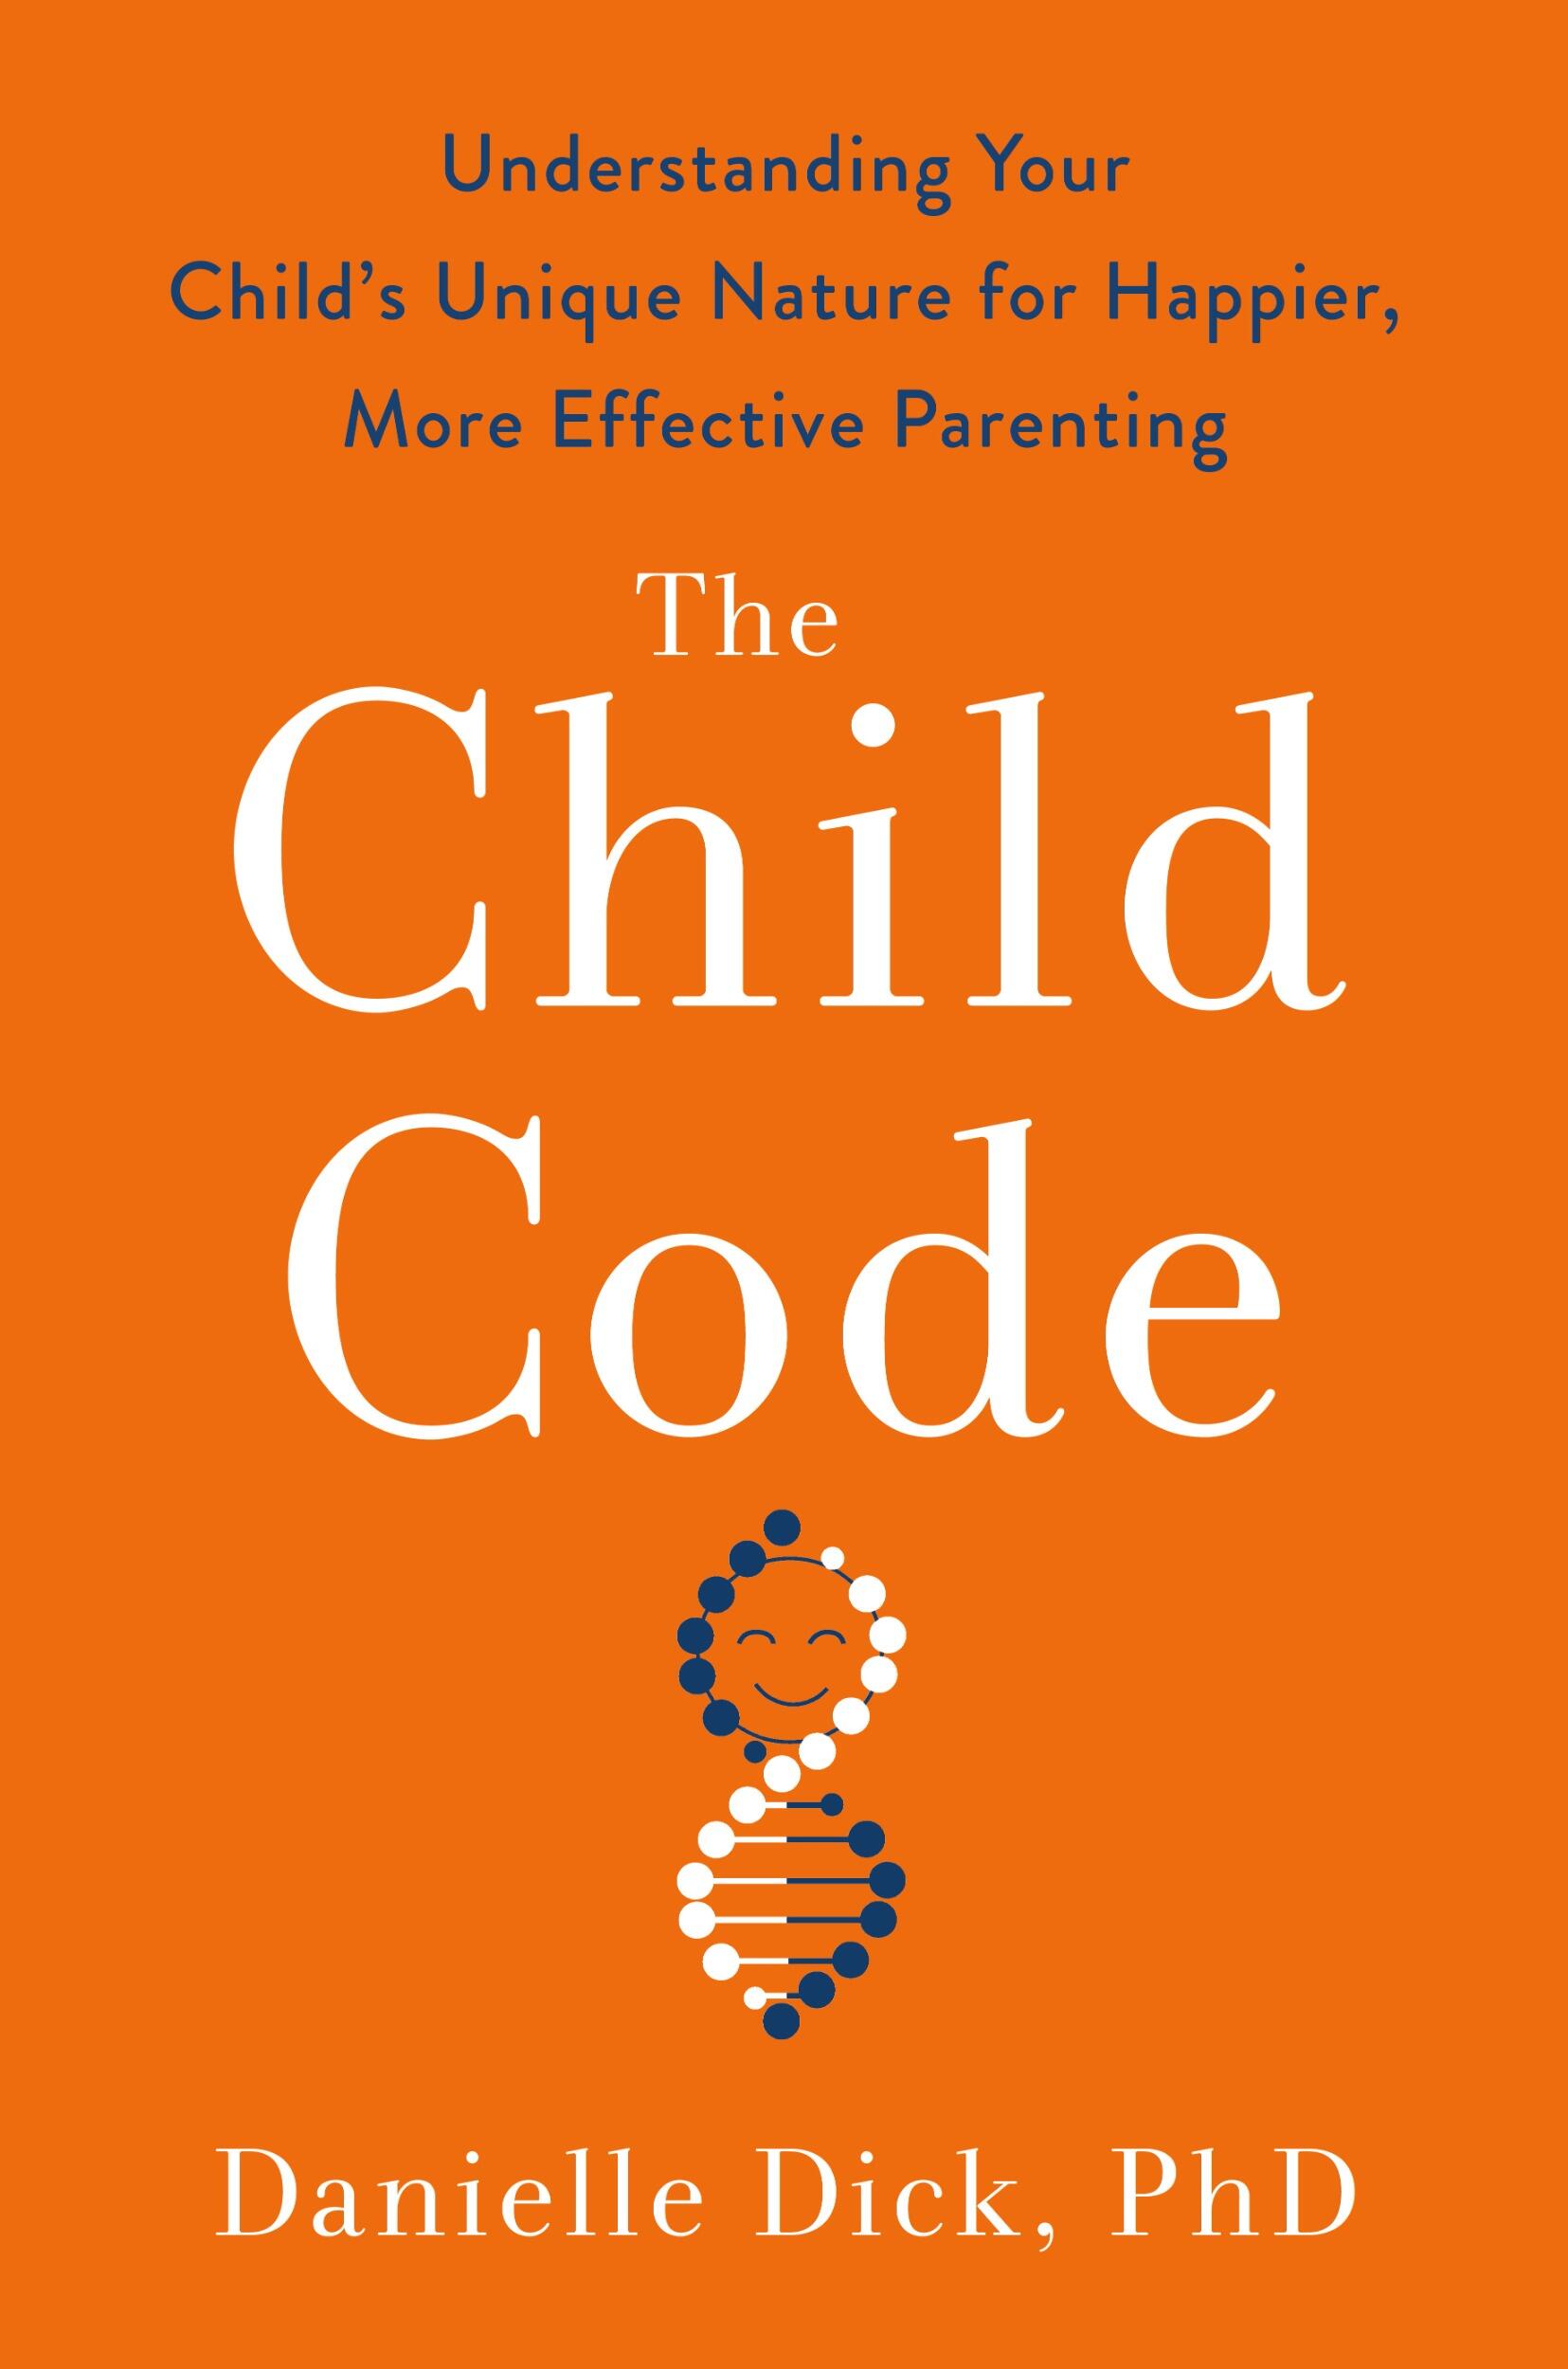 book cover for “The Child Code: Understanding Your Child's Unique Nature for Happier, More Effective Parenting”